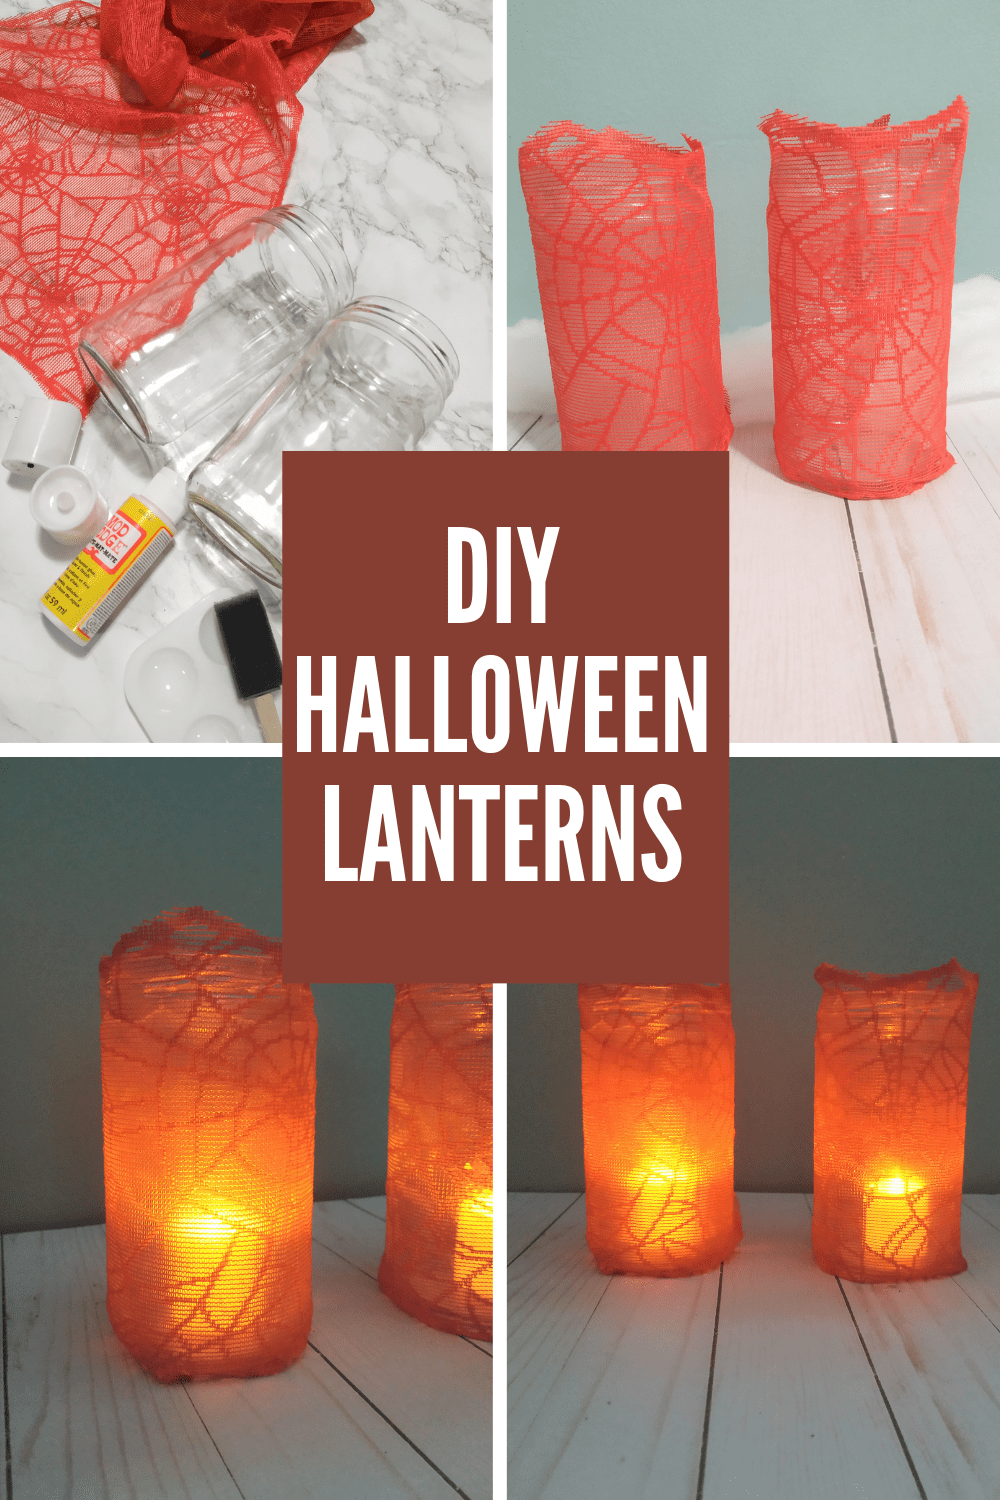 Collage with text overlay showing how to make diy halloween lanterns.